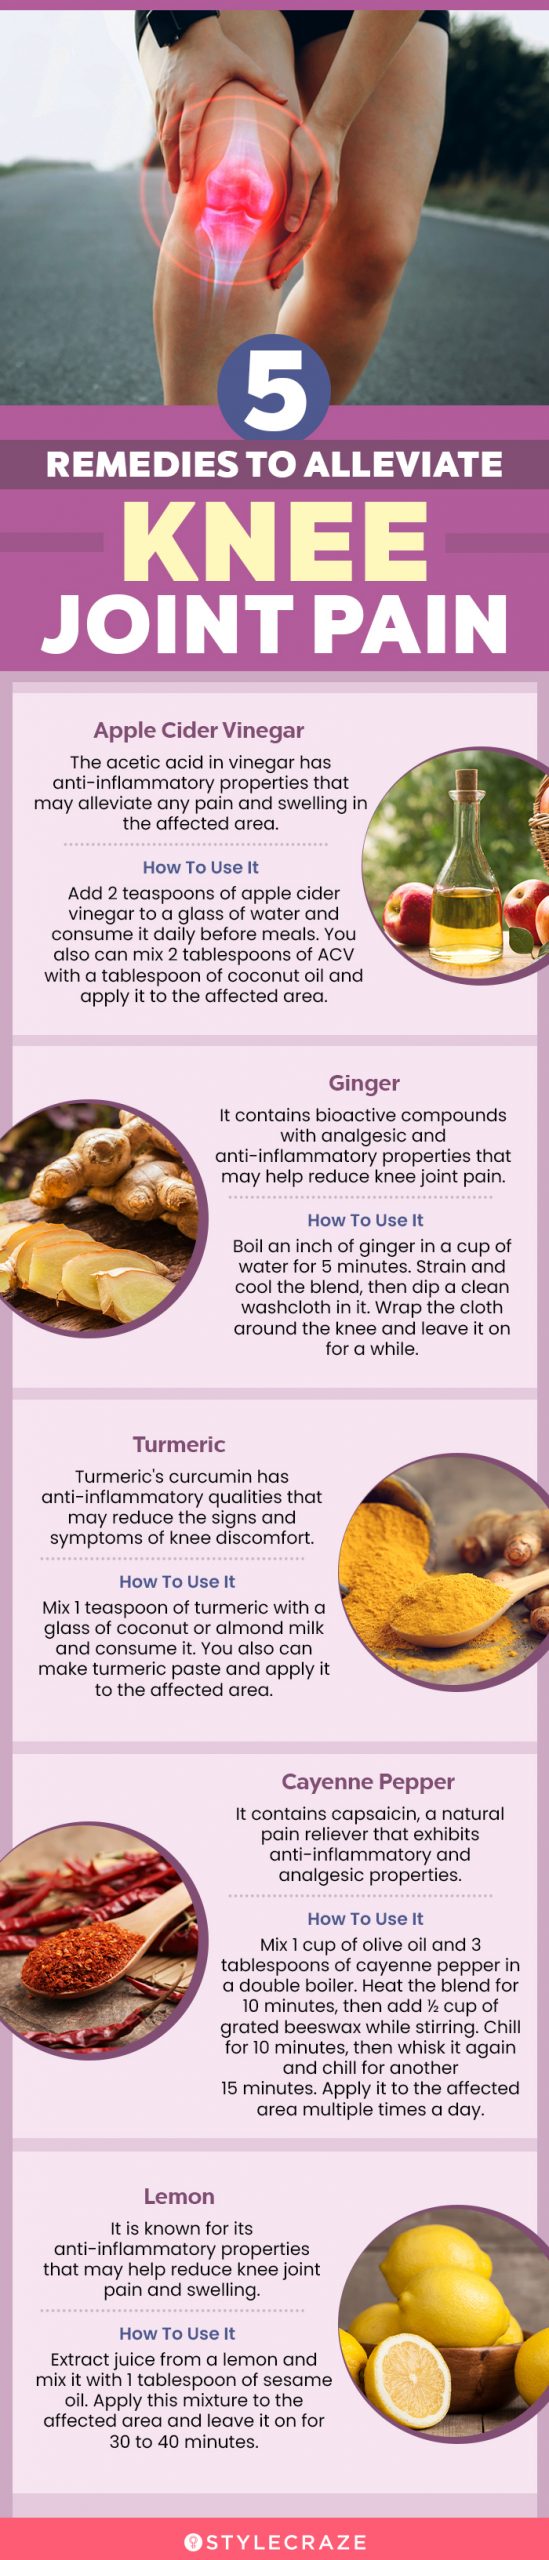 5 remedies to alleviate knee joint pain (infographic)